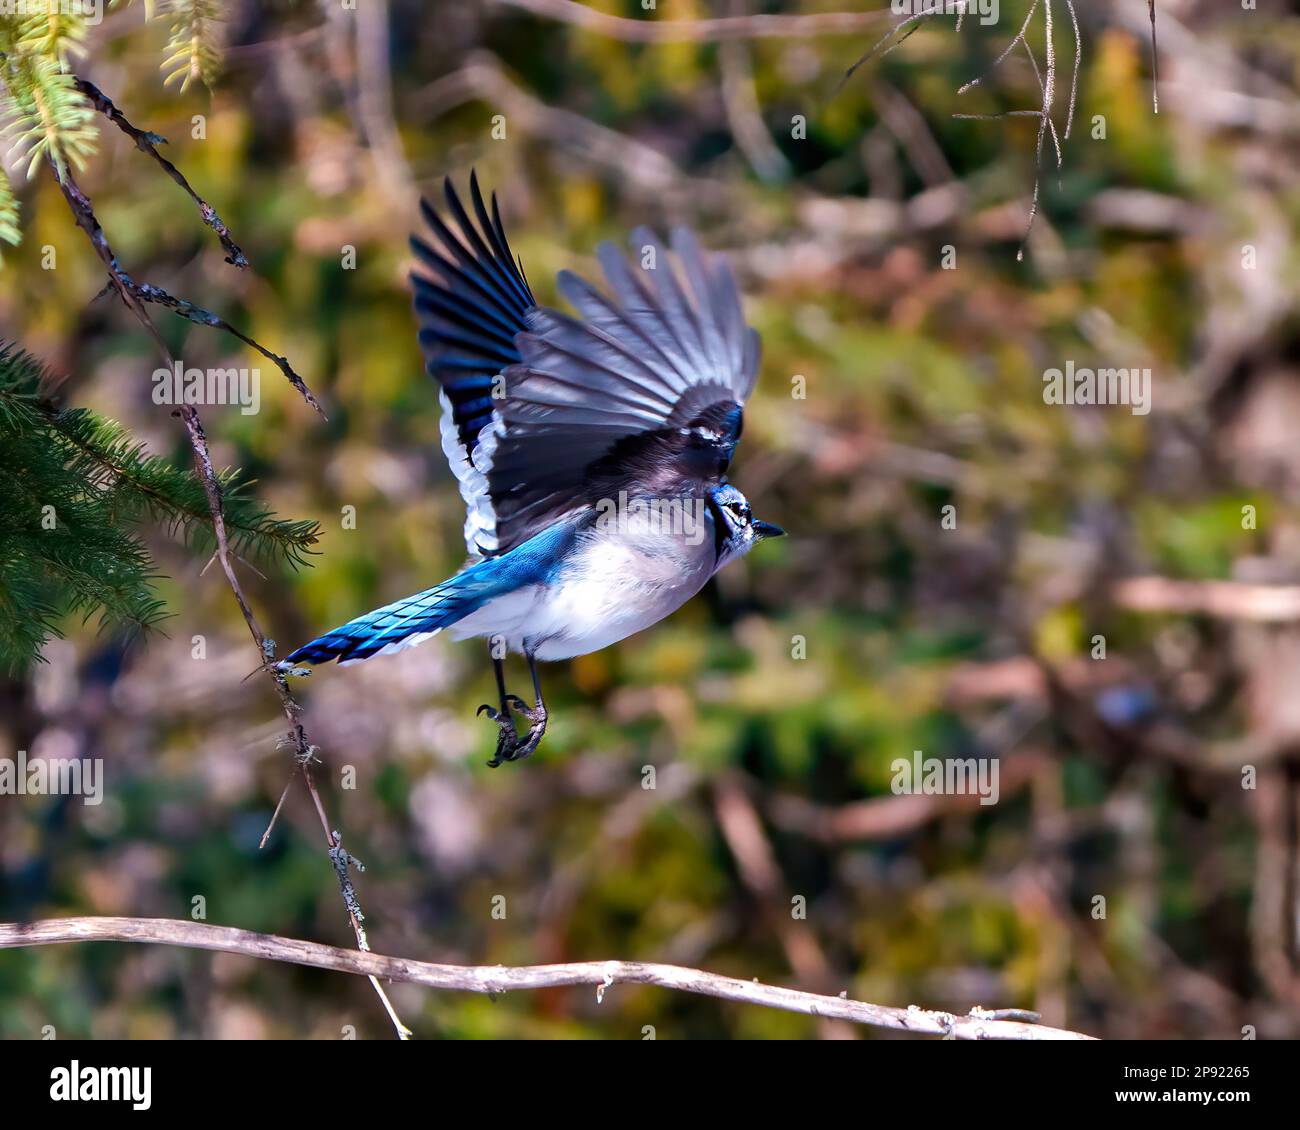 Blue Jay flying with spread wings and displaying blue colour feather plumage with blur forest background in its environment and habitat. Jay bird. Stock Photo